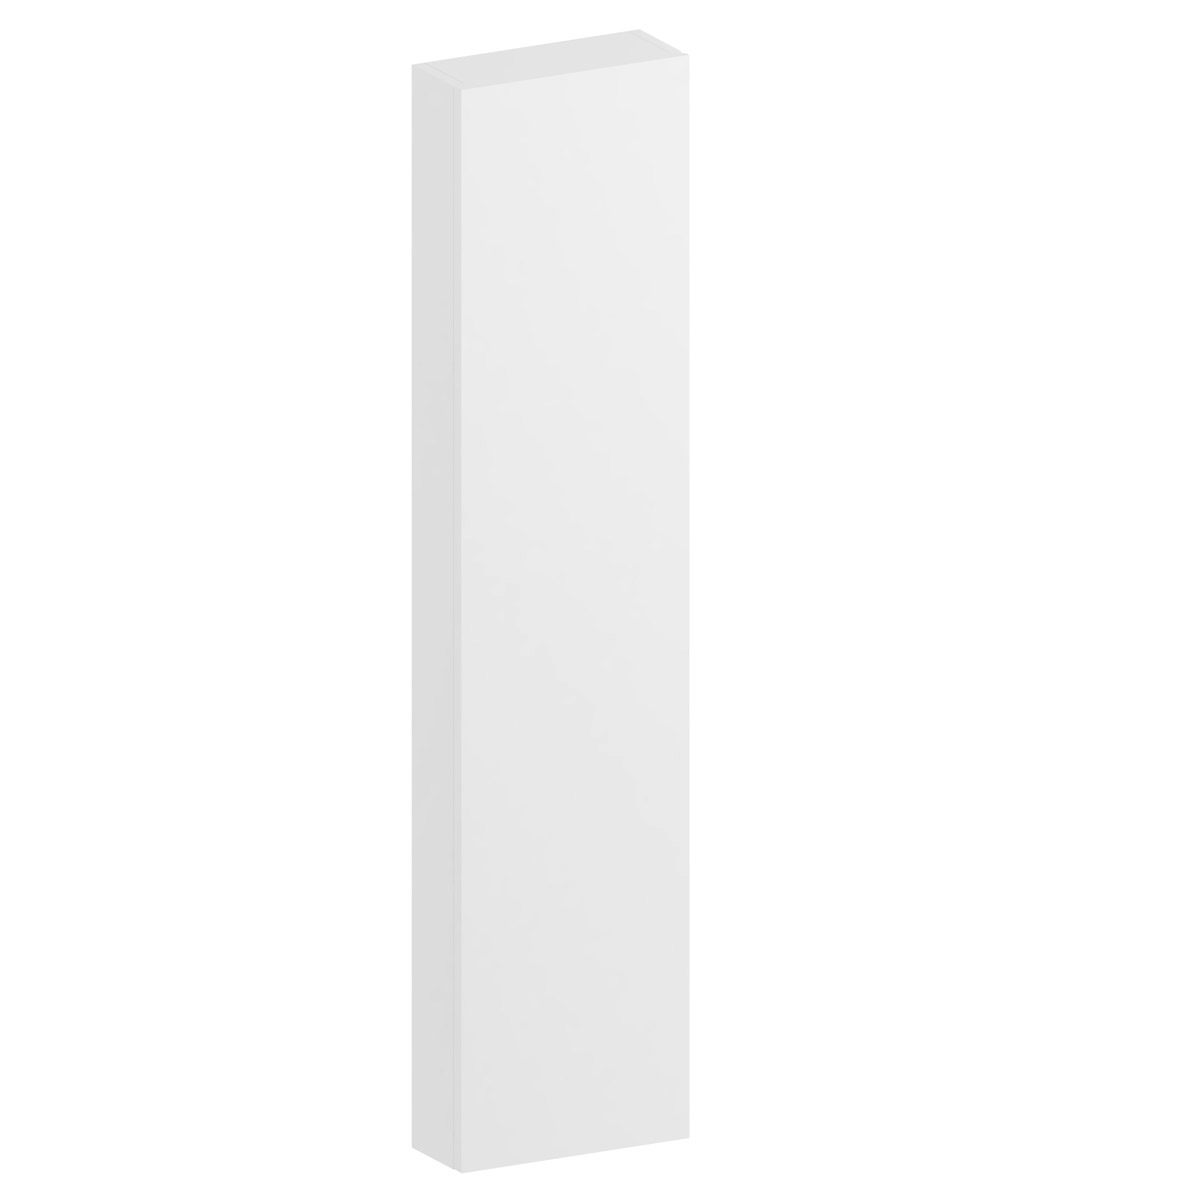 Slimline White Wall Hung Cabinet 1250 X, Thin Wall Cabinet For Bathroom